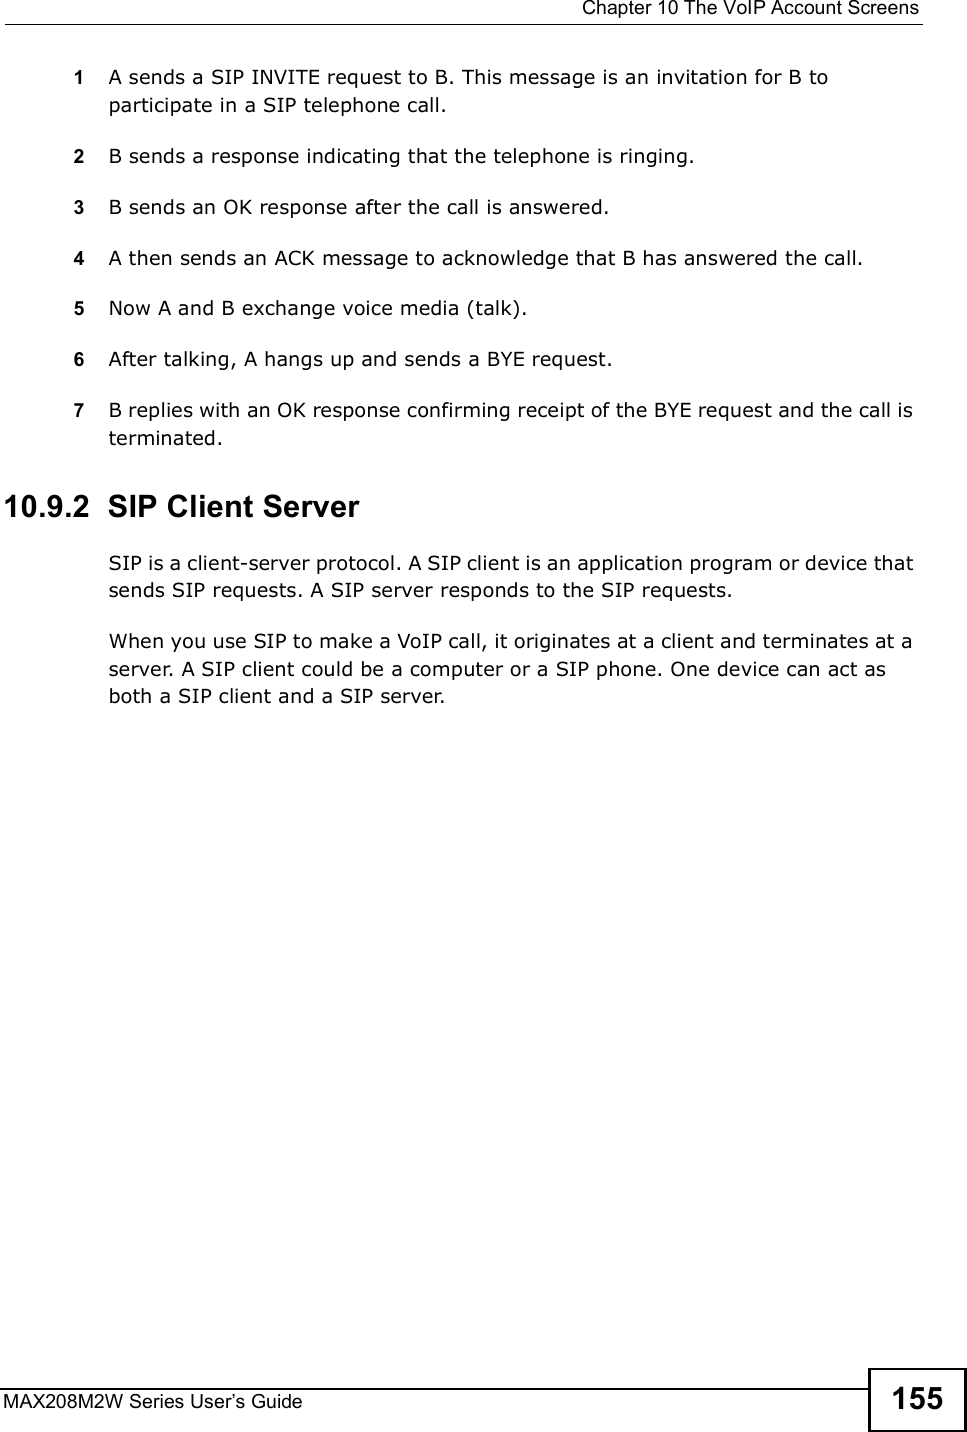  Chapter 10The VoIP Account ScreensMAX208M2W Series User s Guide 1551A sends a SIP INVITE request to B. This message is an invitation for B to participate in a SIP telephone call. 2B sends a response indicating that the telephone is ringing.3B sends an OK response after the call is answered. 4A then sends an ACK message to acknowledge that B has answered the call. 5Now A and B exchange voice media (talk). 6After talking, A hangs up and sends a BYE request. 7B replies with an OK response confirming receipt of the BYE request and the call is terminated.10.9.2  SIP Client ServerSIP is a client-server protocol. A SIP client is an application program or device that sends SIP requests. A SIP server responds to the SIP requests. When you use SIP to make a VoIP call, it originates at a client and terminates at a server. A SIP client could be a computer or a SIP phone. One device can act as both a SIP client and a SIP server. 